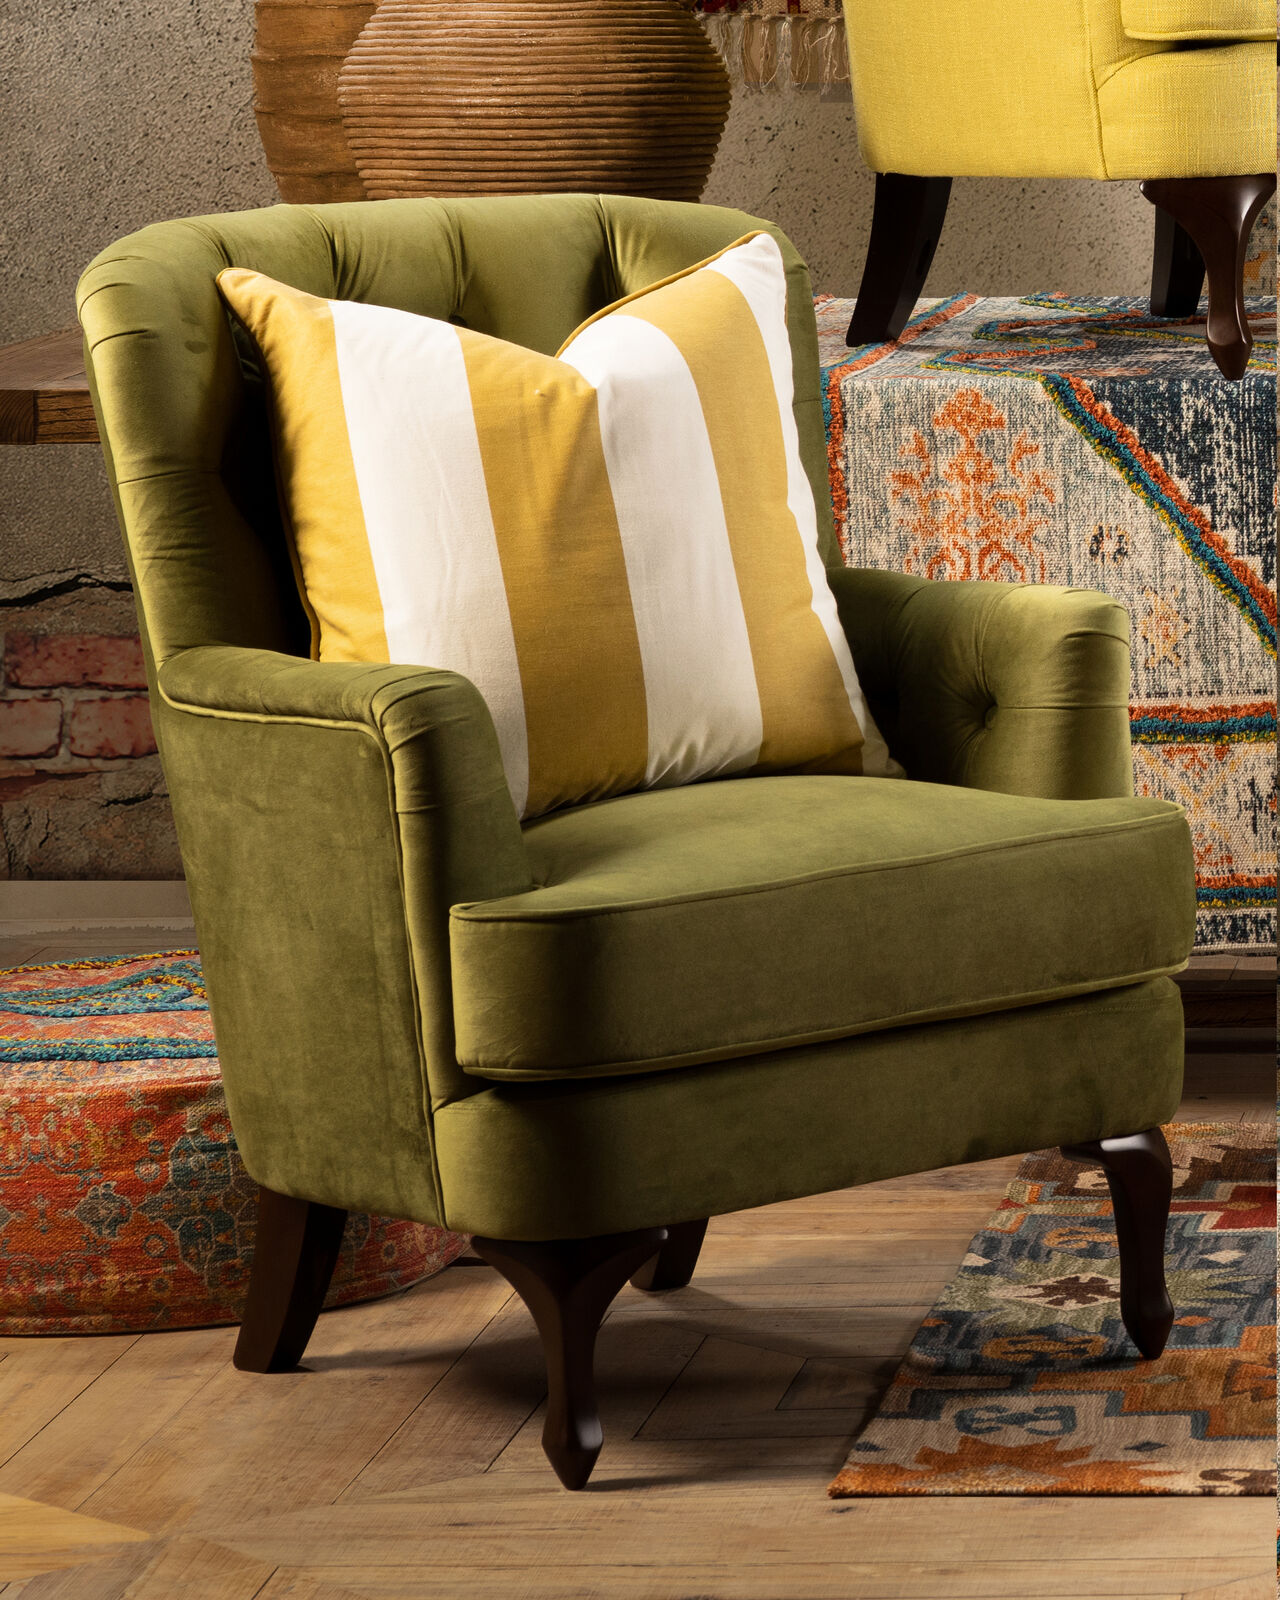 Fully upholstered green velvet chair with deep button back and cabriole leg.